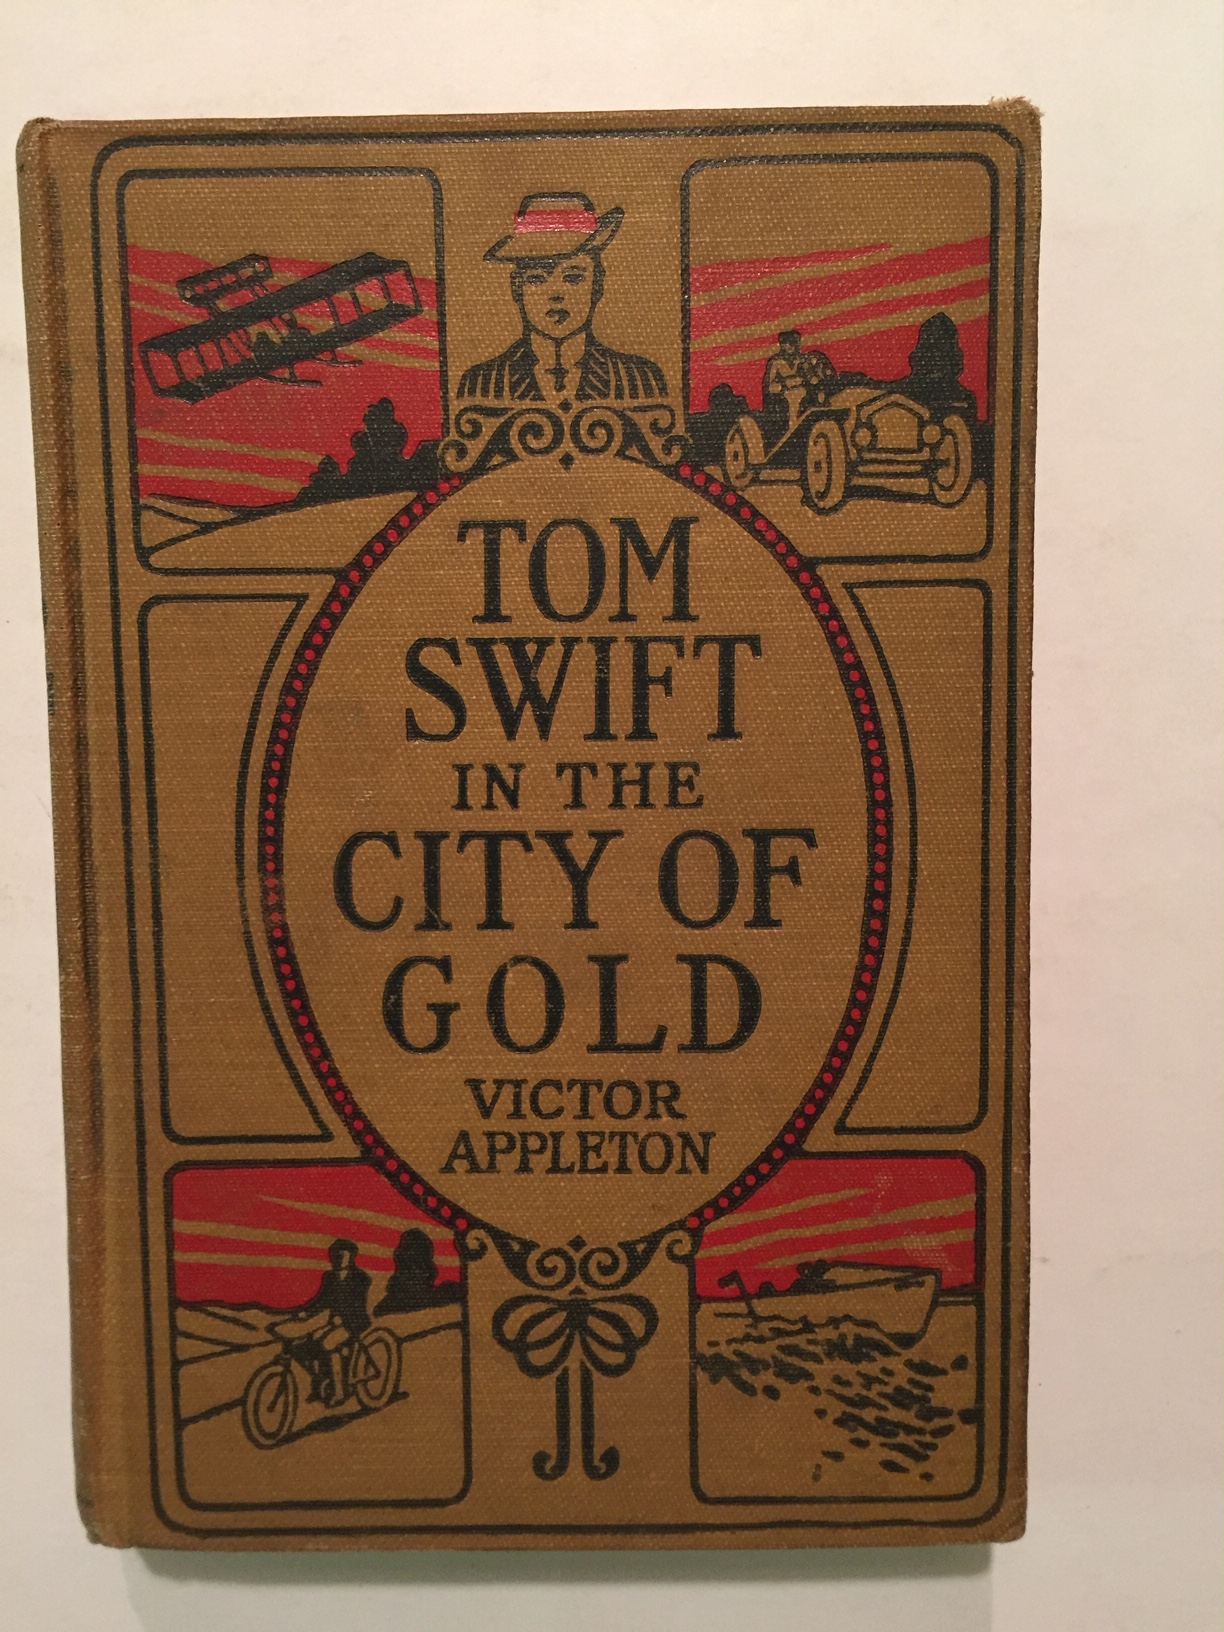 Tom Swift in the City of Gold book image